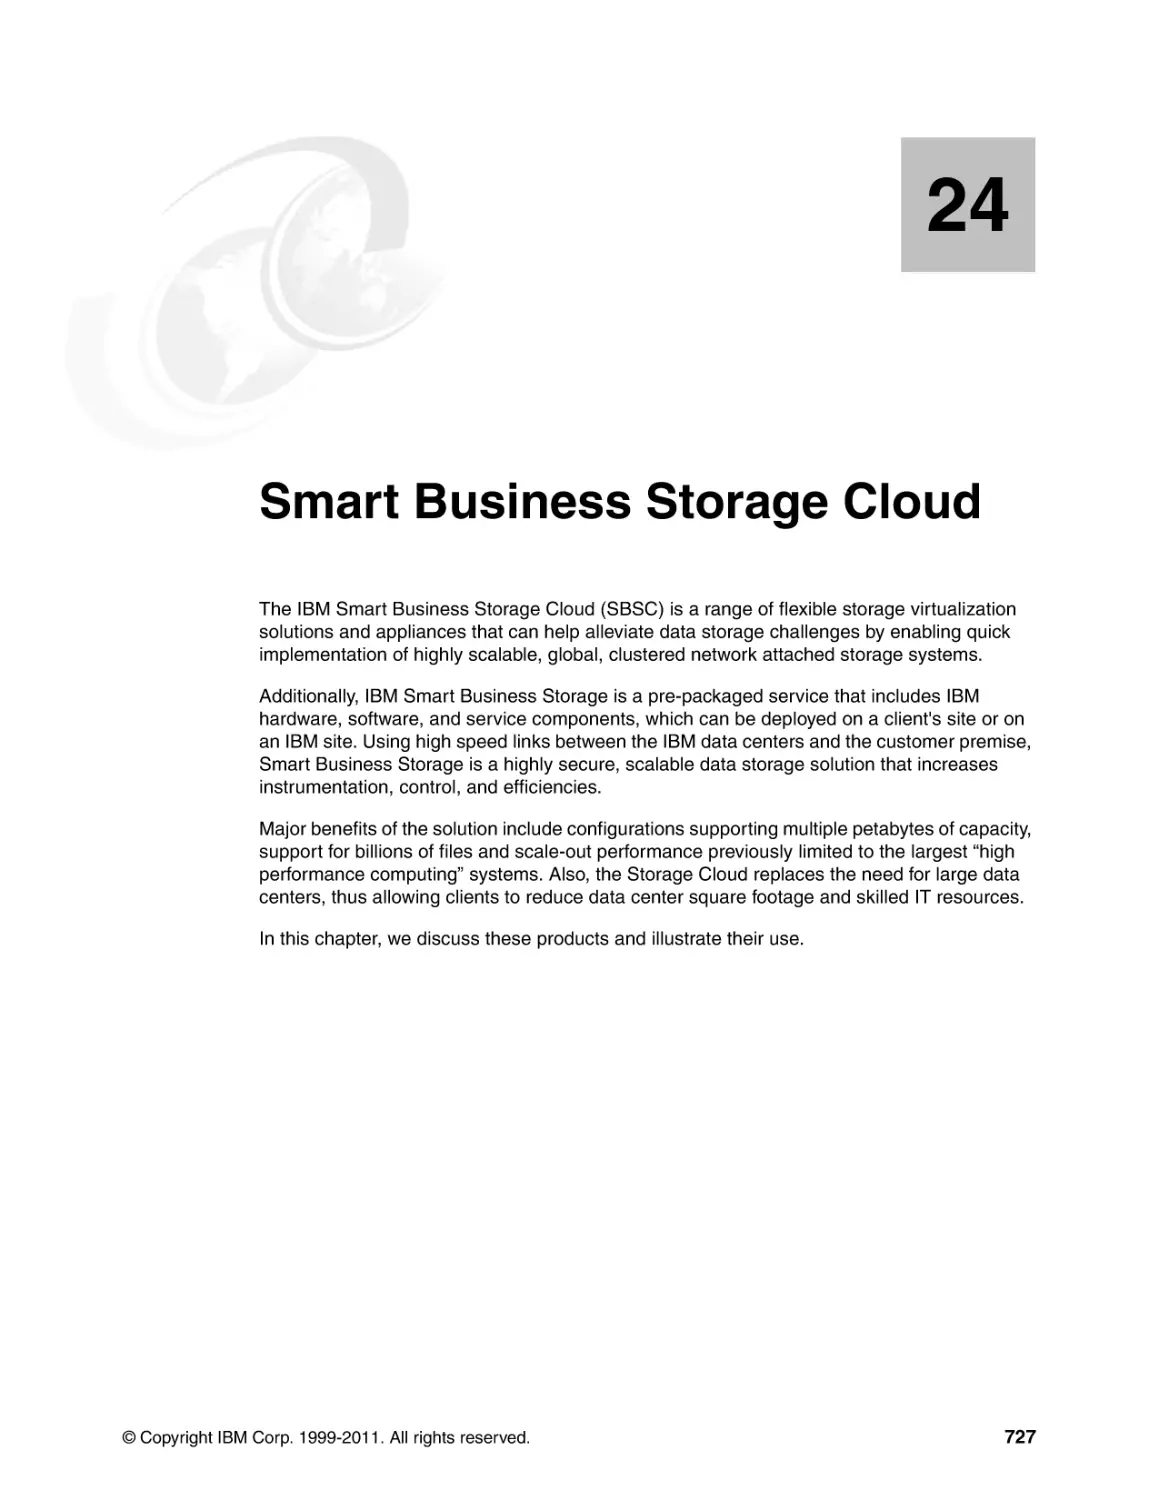 Chapter 24. Smart Business Storage Cloud